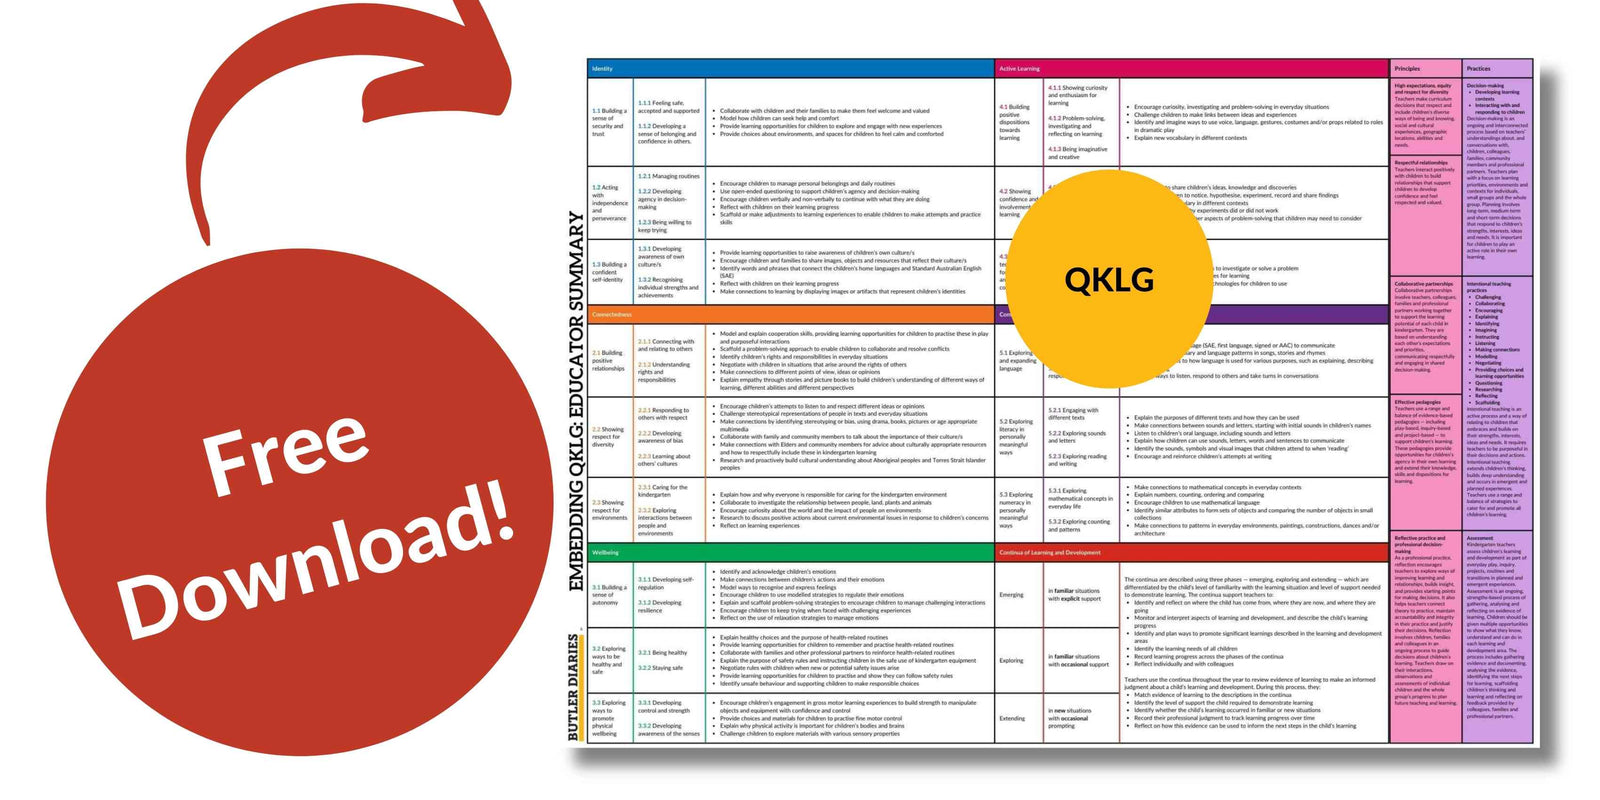 Free QKLG Download: Embedding QKLG into Practice Educator Summary Poster